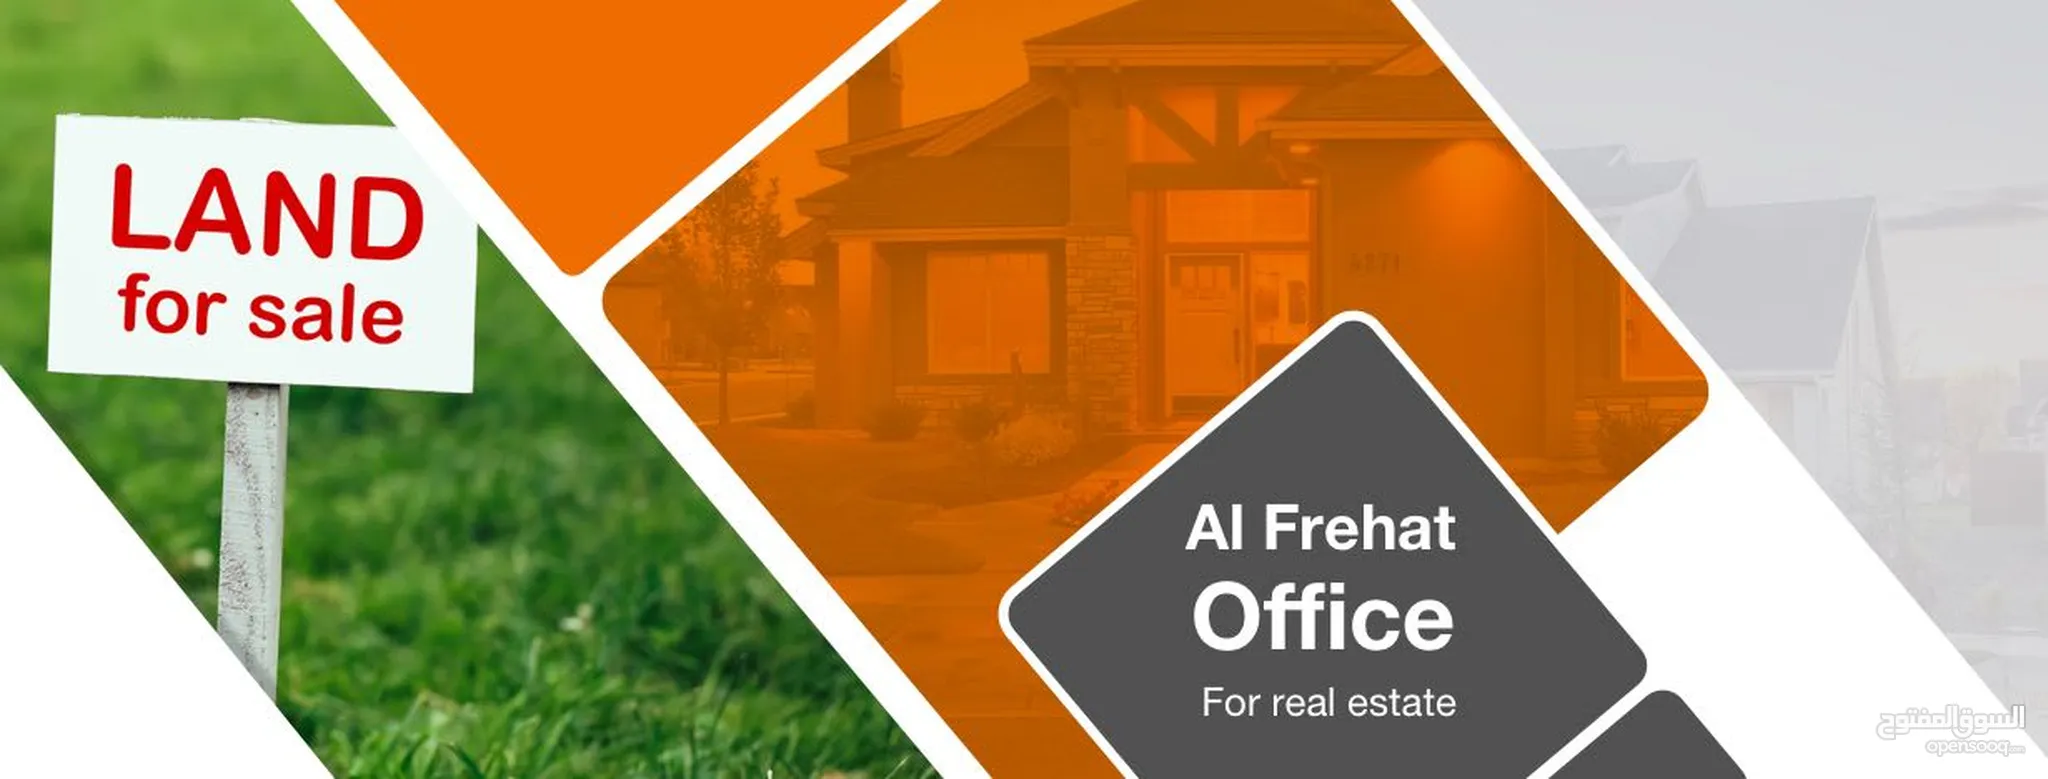 Ouday Frehat Office For Real Estate